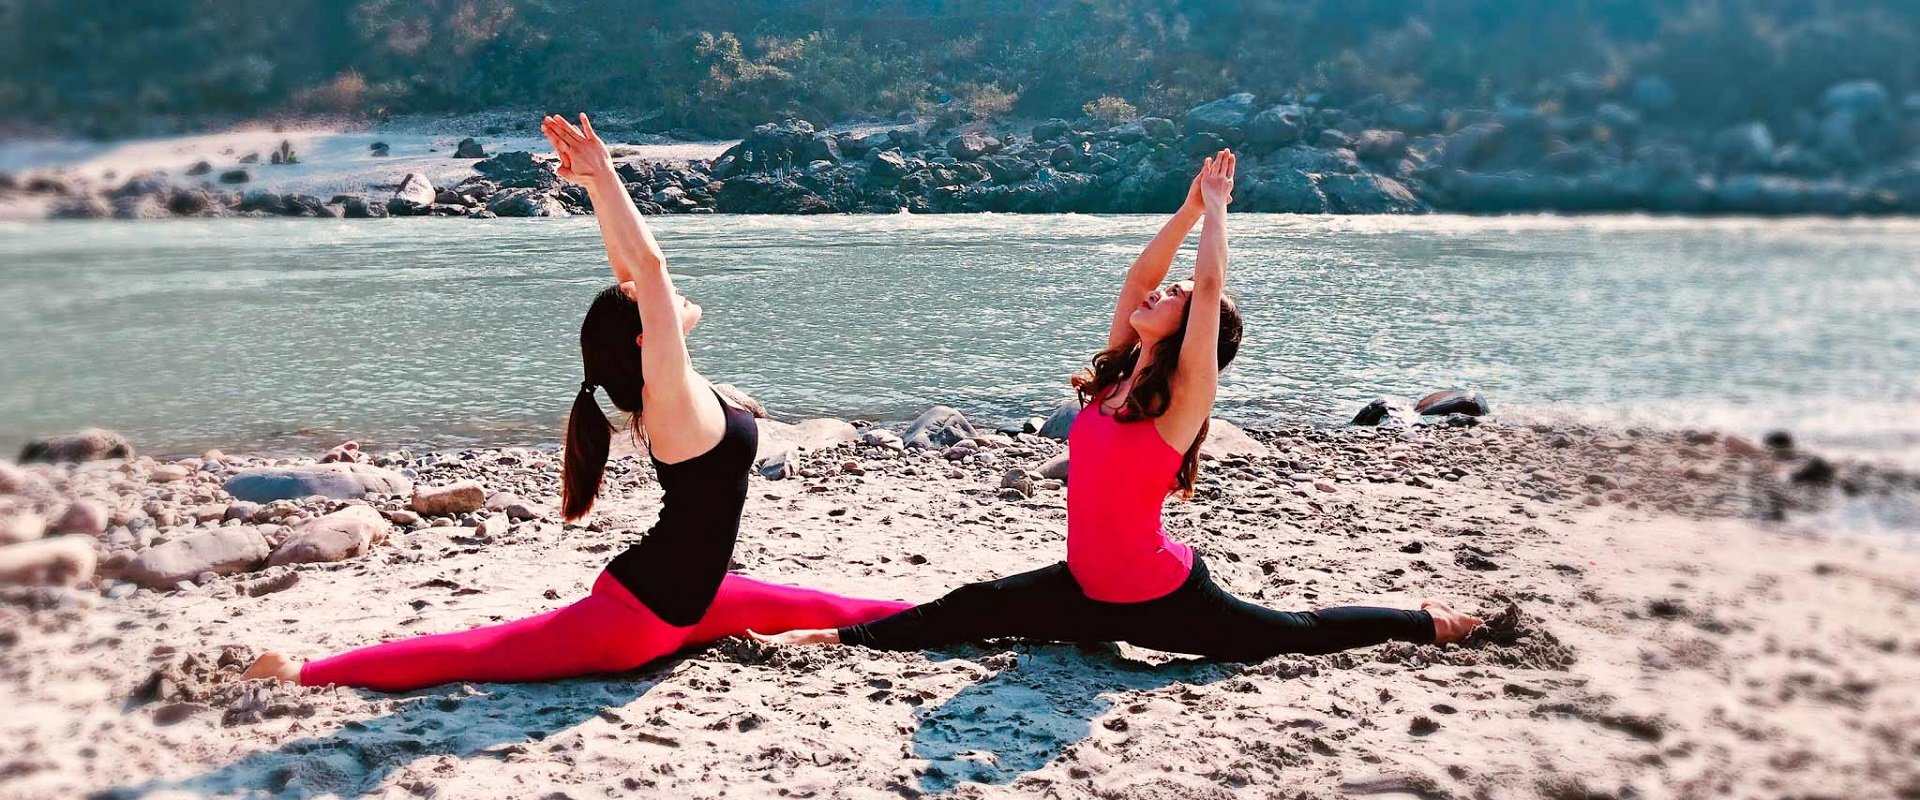 yoga in rishikesh - fun place to hang out with friends in india